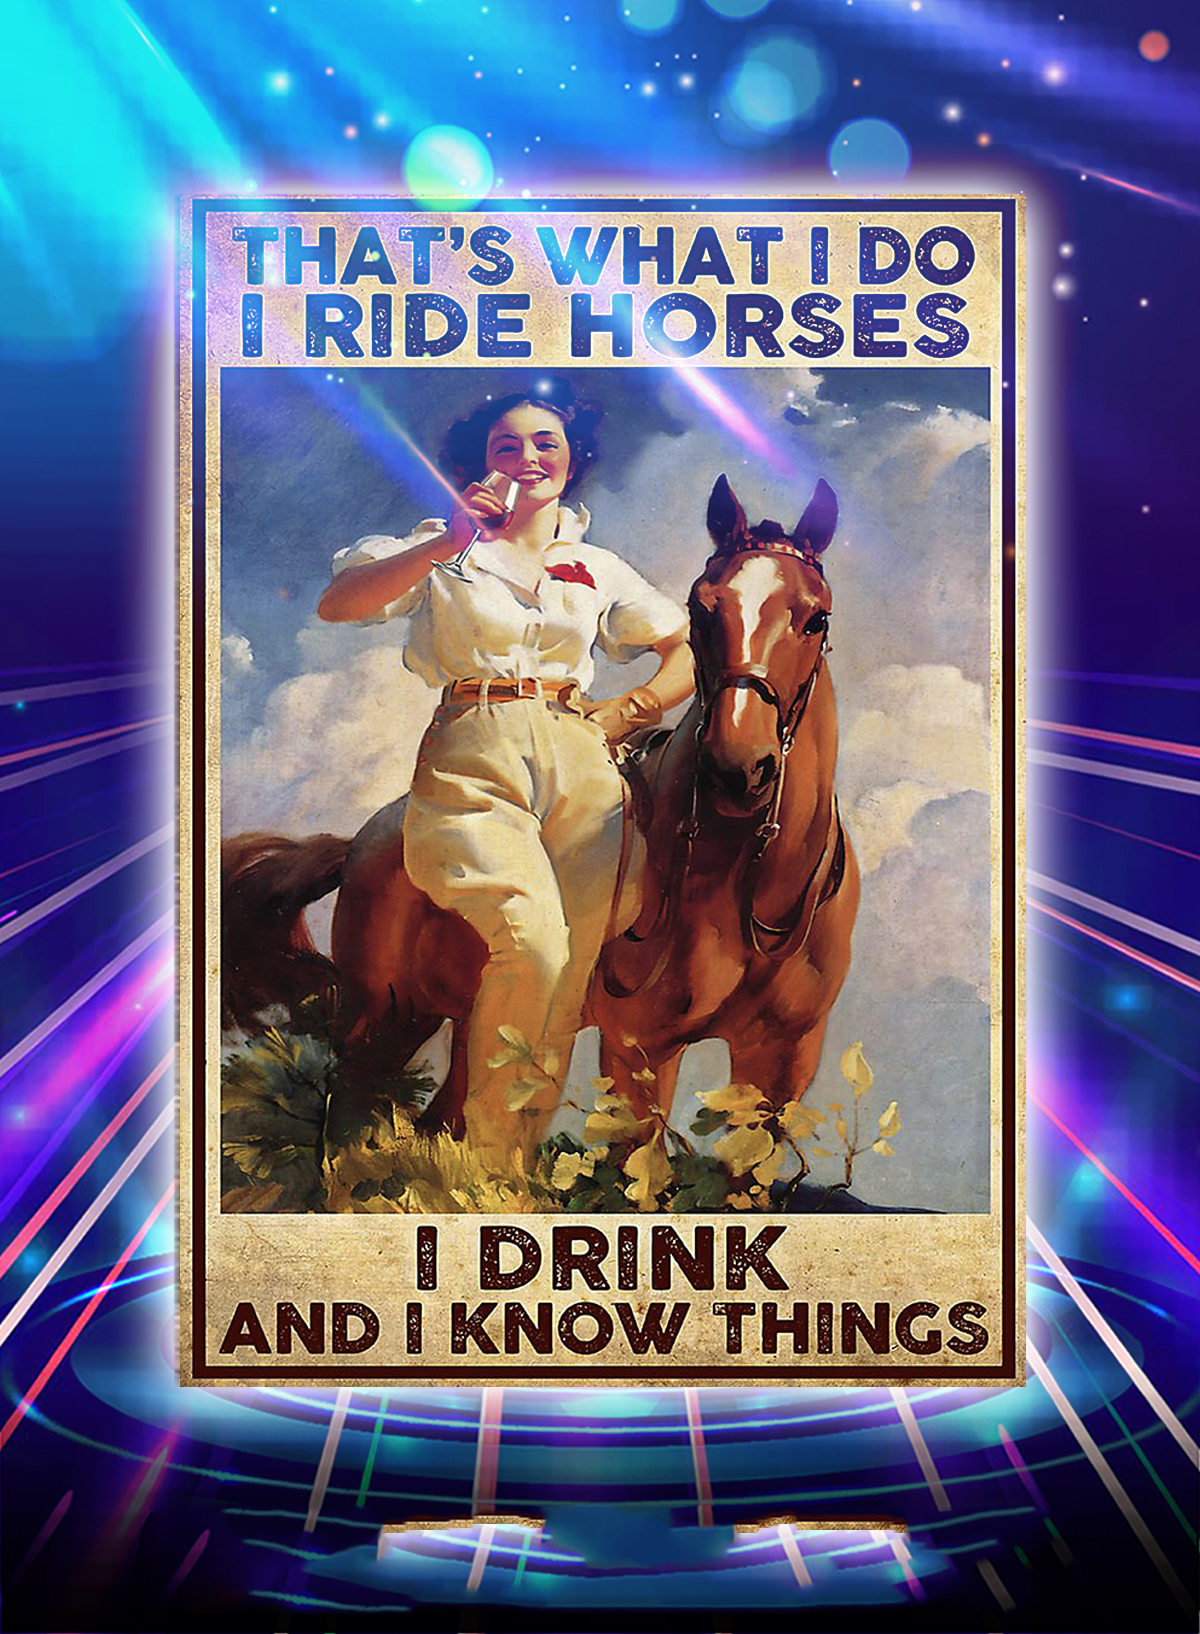 Girl that's what i do i ride horses i drink and i know things poster - A4